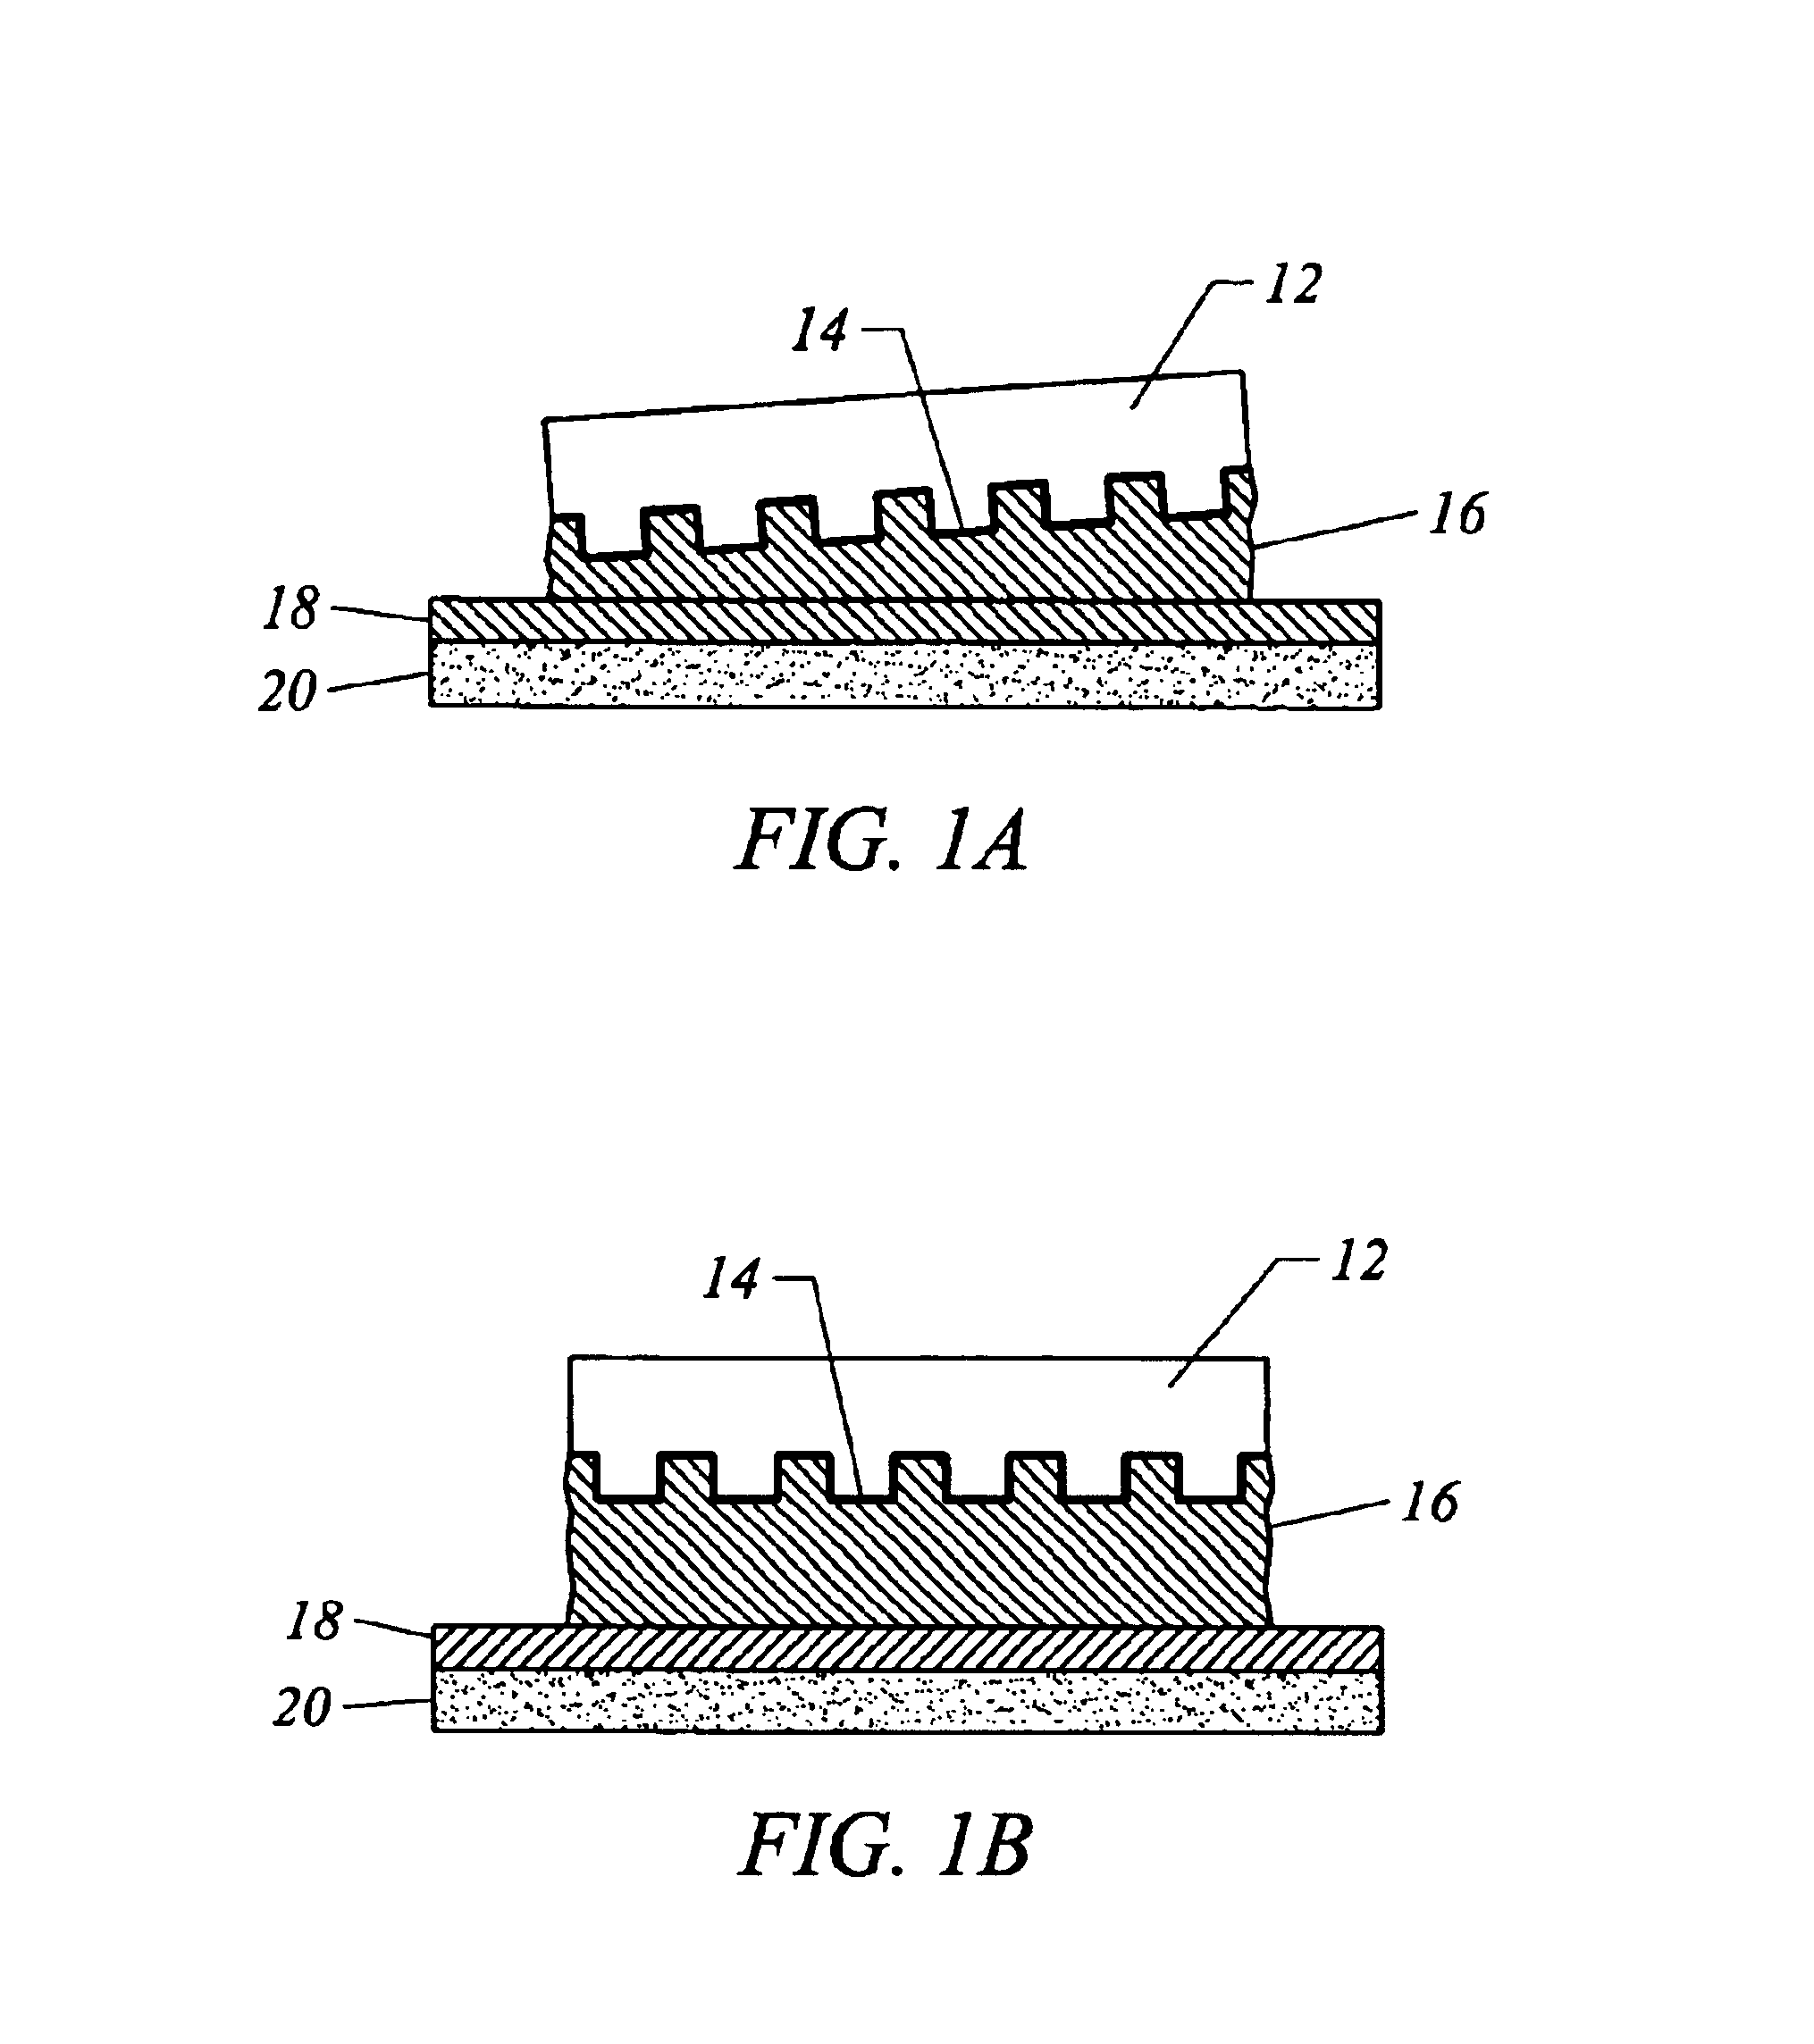 High precision orientation alignment and gap control stages for imprint lithography processes